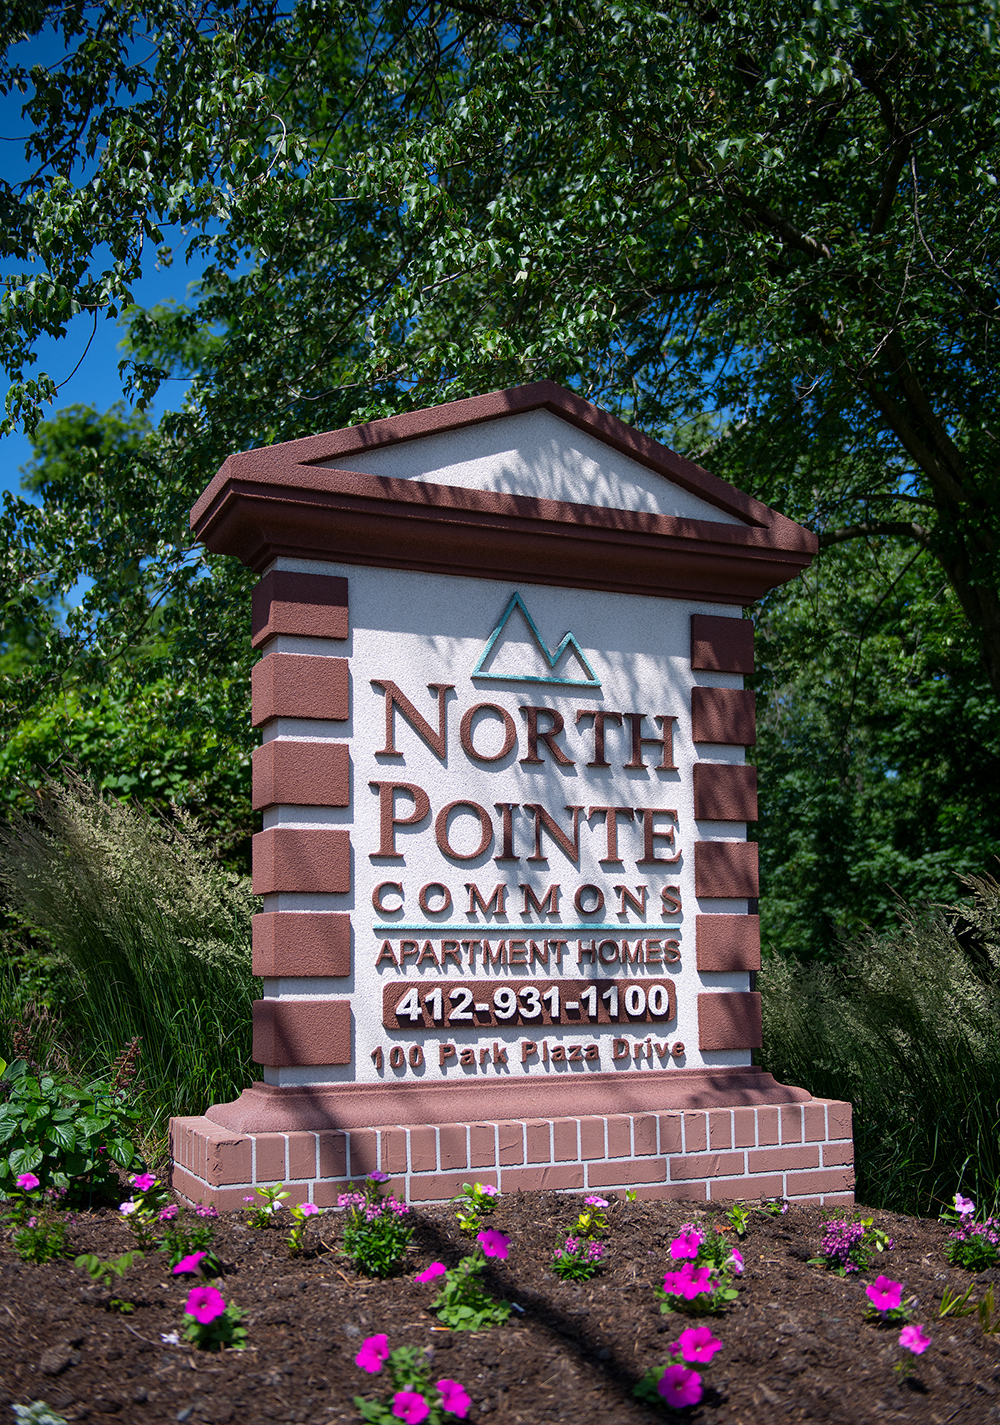 Sampson Morris Group Residential Property North Pointe Commons